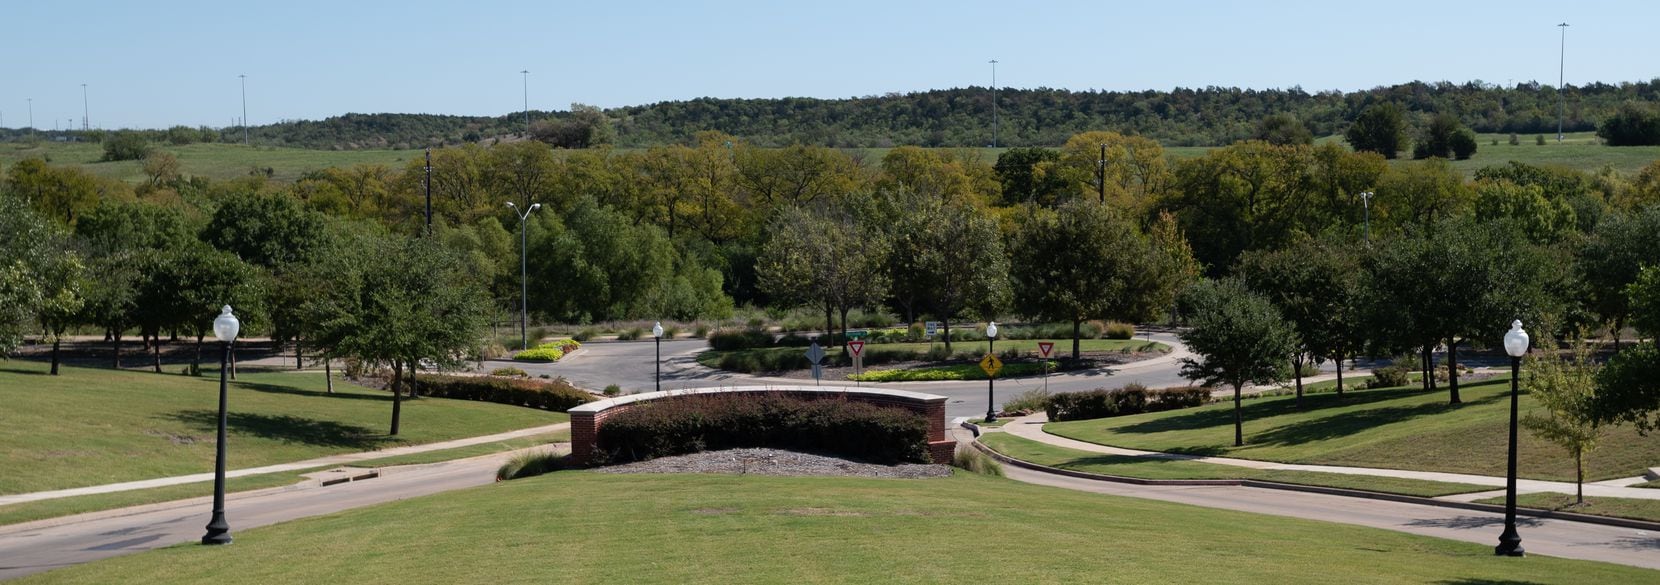 The entrance to Capella Park in Dallas, off South Merrifield Road, where traffic circles...